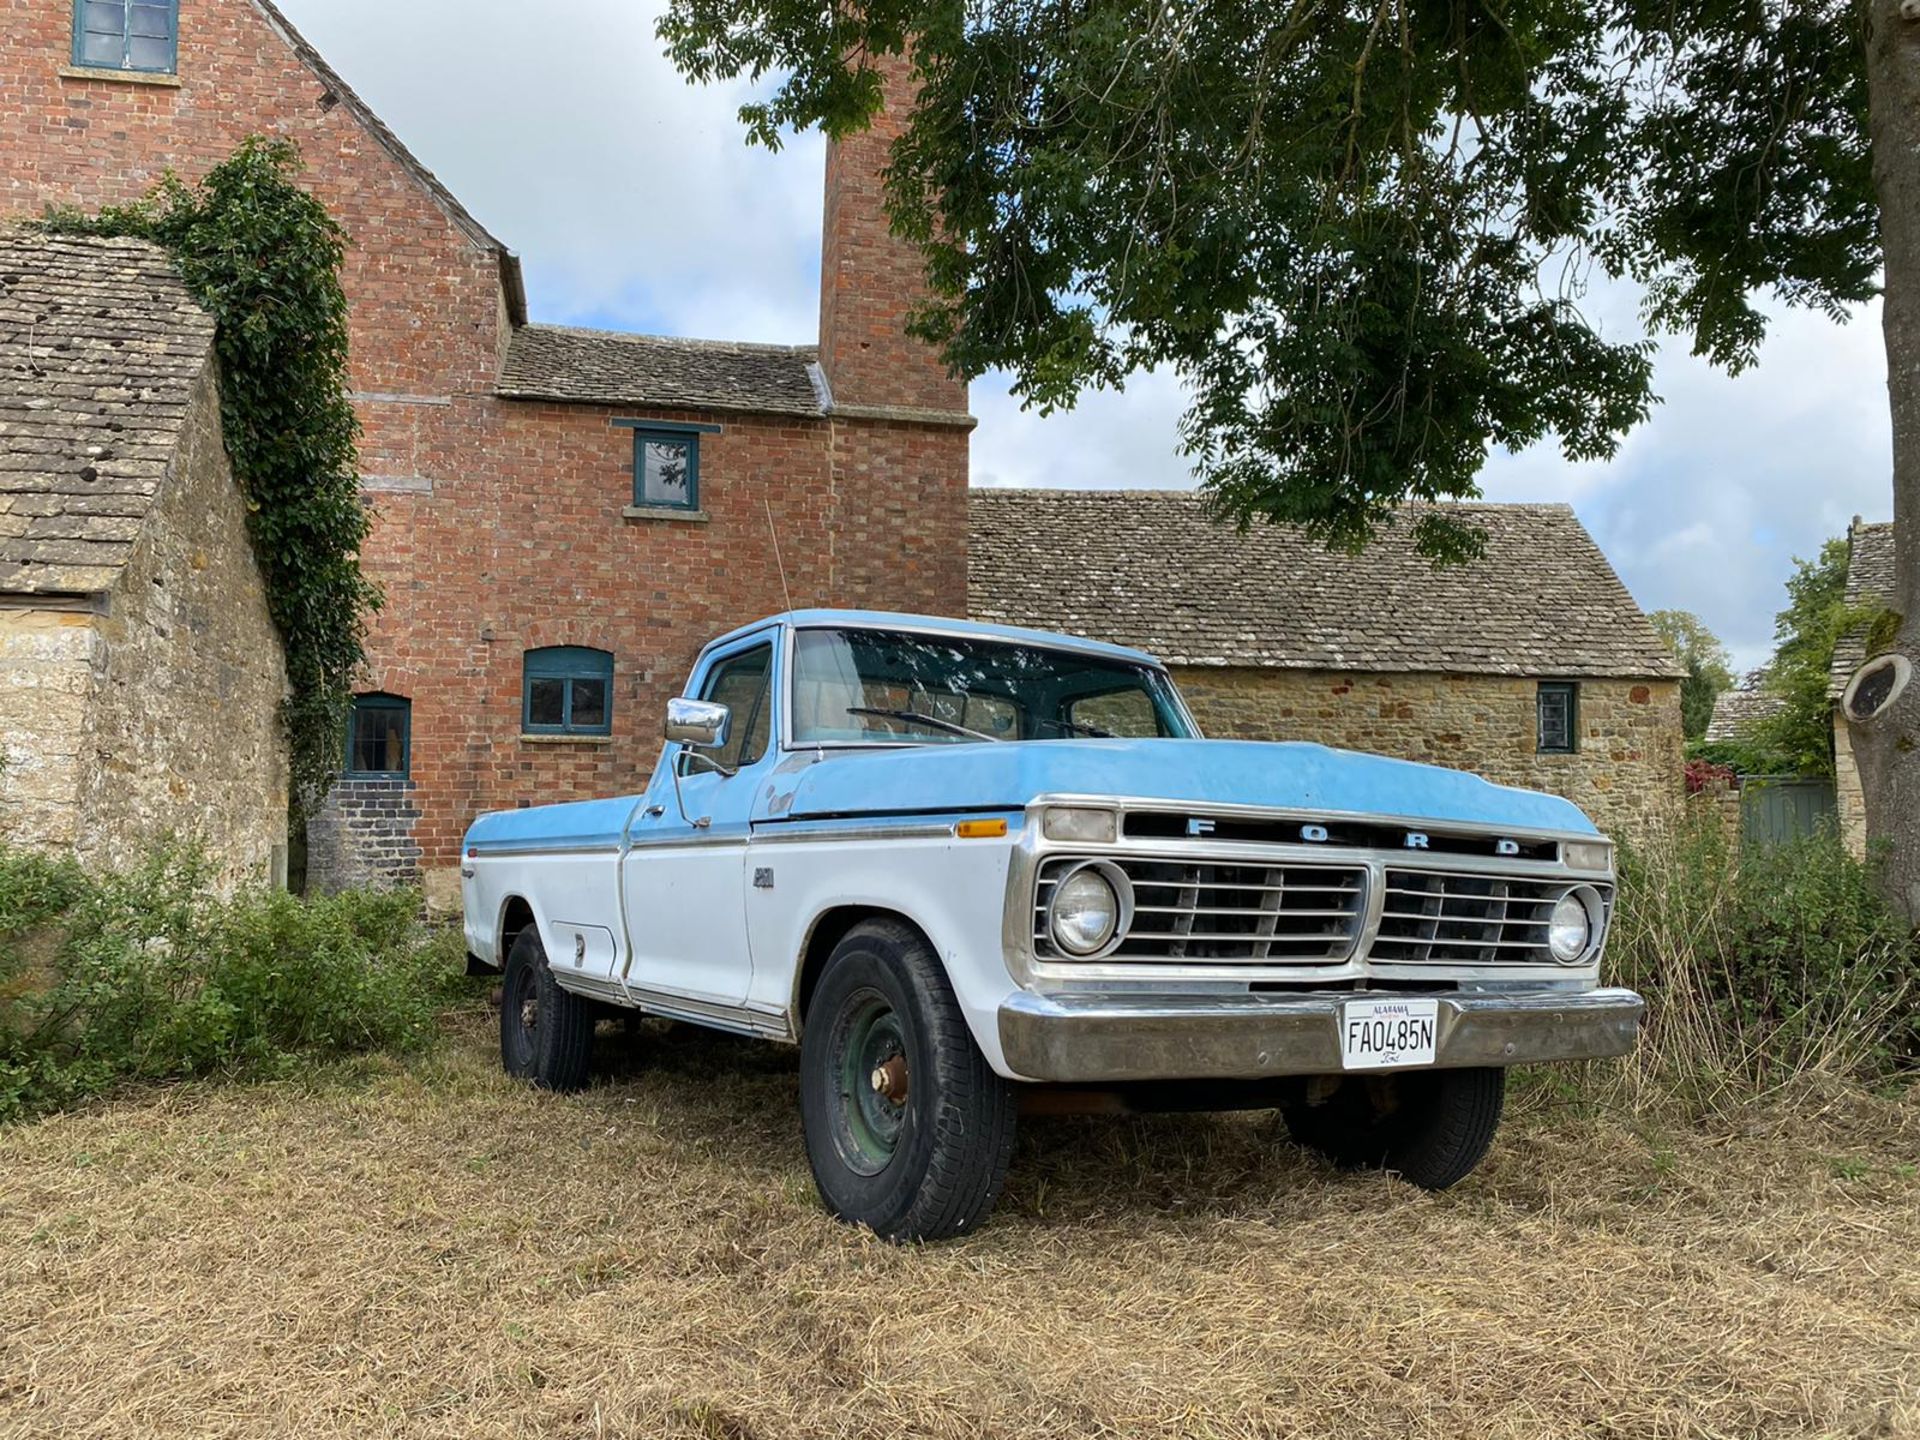 1975 FORD F-250 6.4 (390) V8, 4 SPEED MANUAL, HAS JUST BEEN REGISTERED, NEW BENCH SEAT *NO VAT*